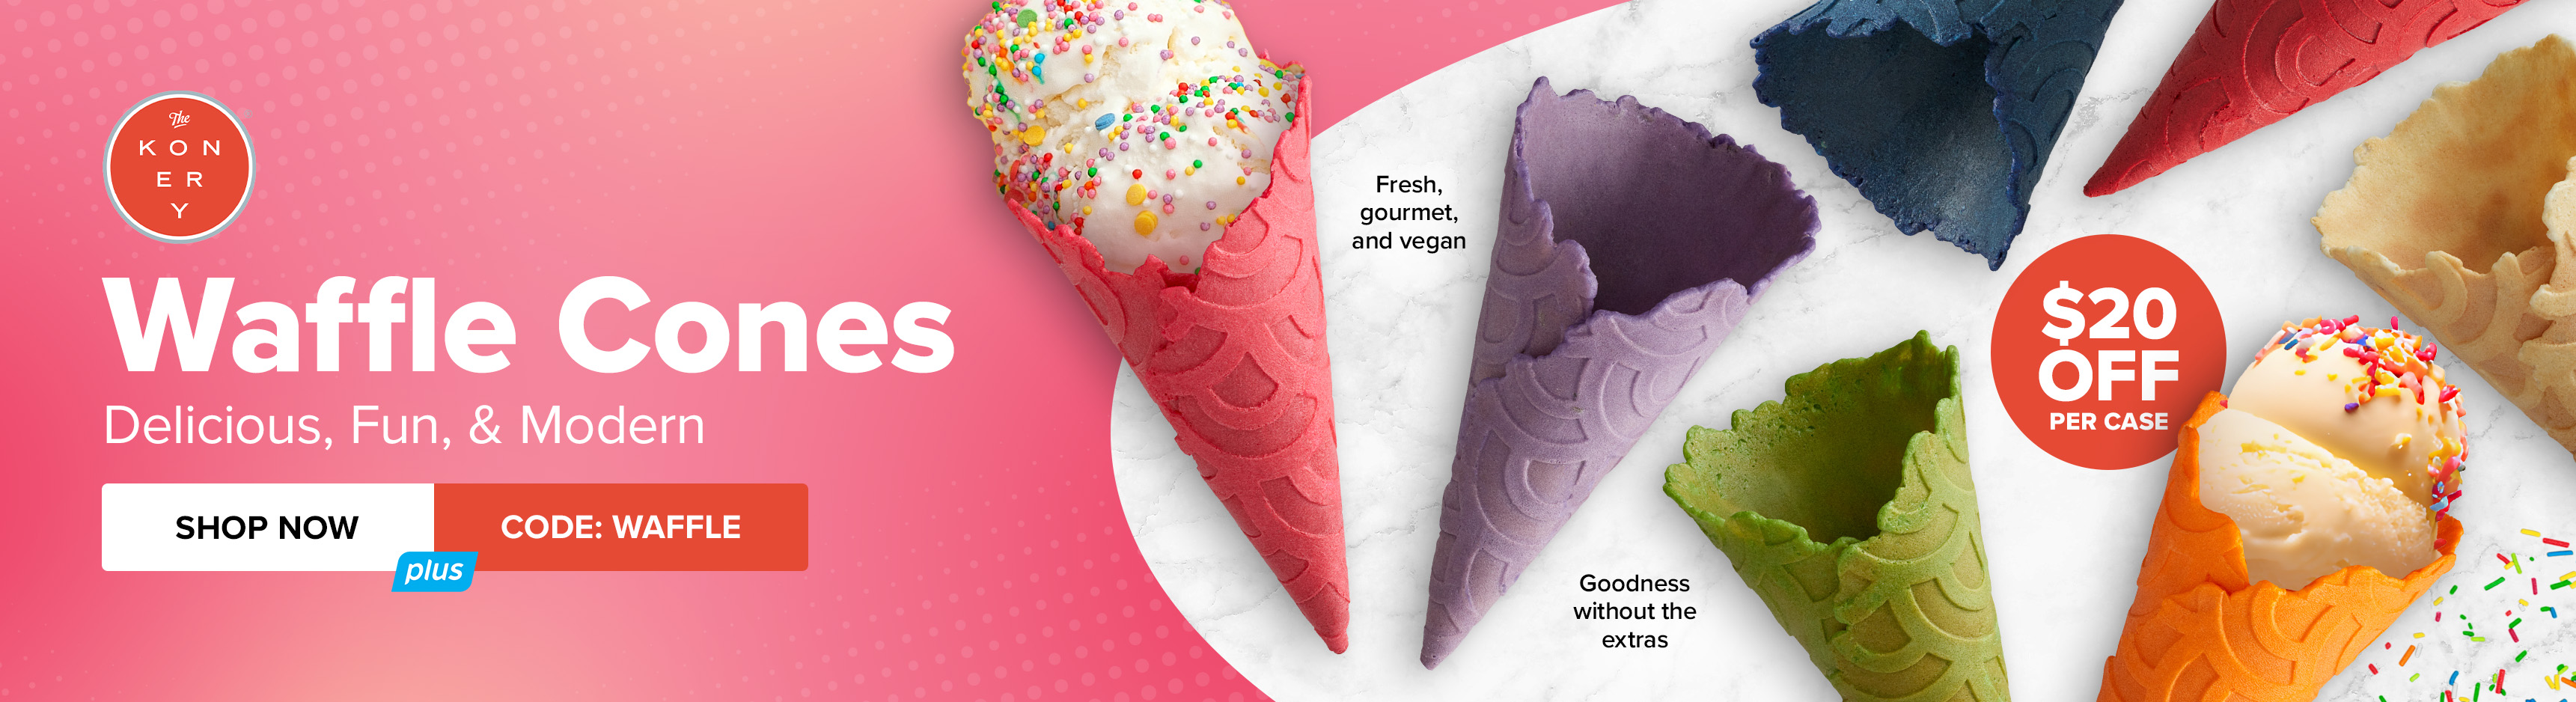 The Konery Waffle Cones. Delicious, Fun, and Modern. Shop Now. Use Code: WAFFLE and Save $20 Per Case.